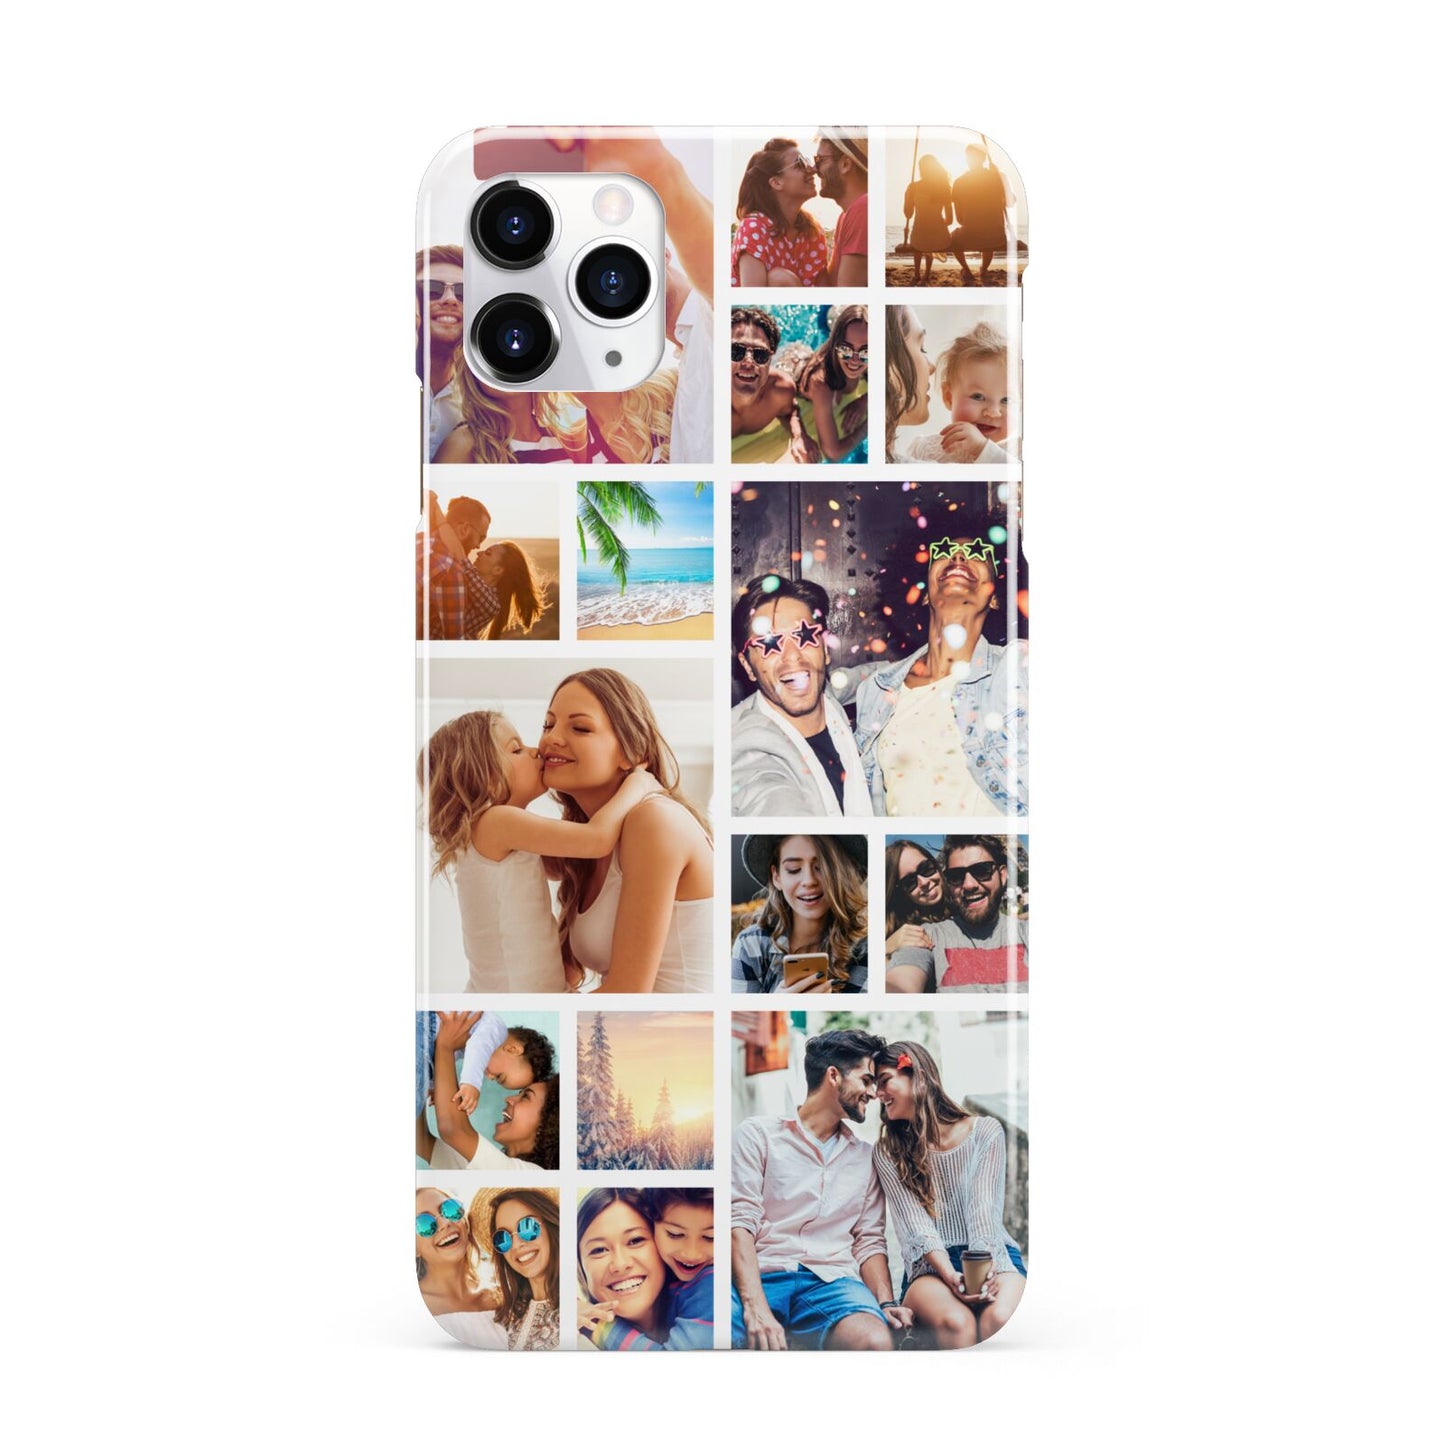 Abstract Multi Tile Photo Montage Upload iPhone 11 Pro Max 3D Snap Case